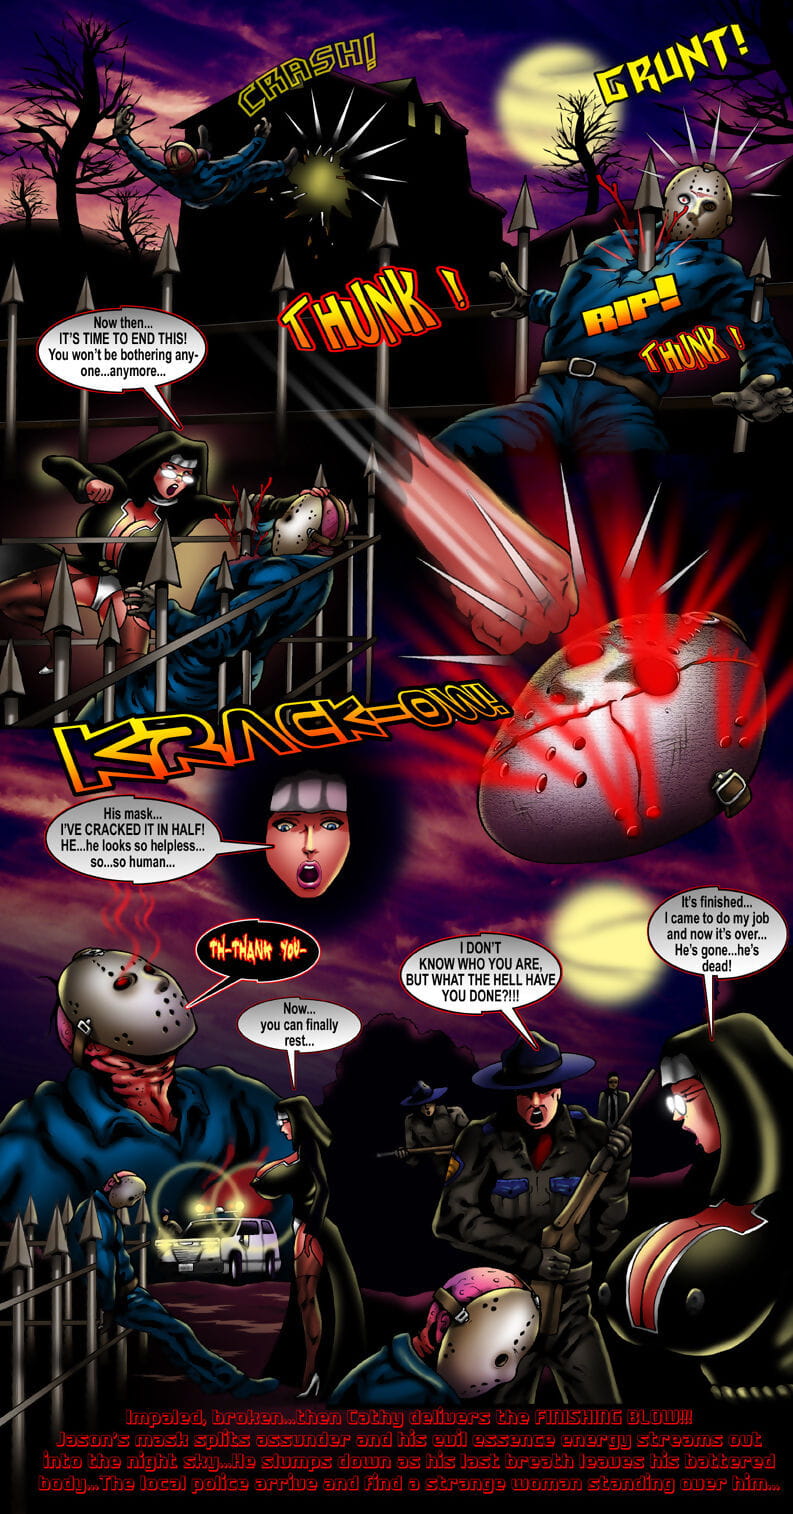 Cathy Canuck - Friday the 13th page 1